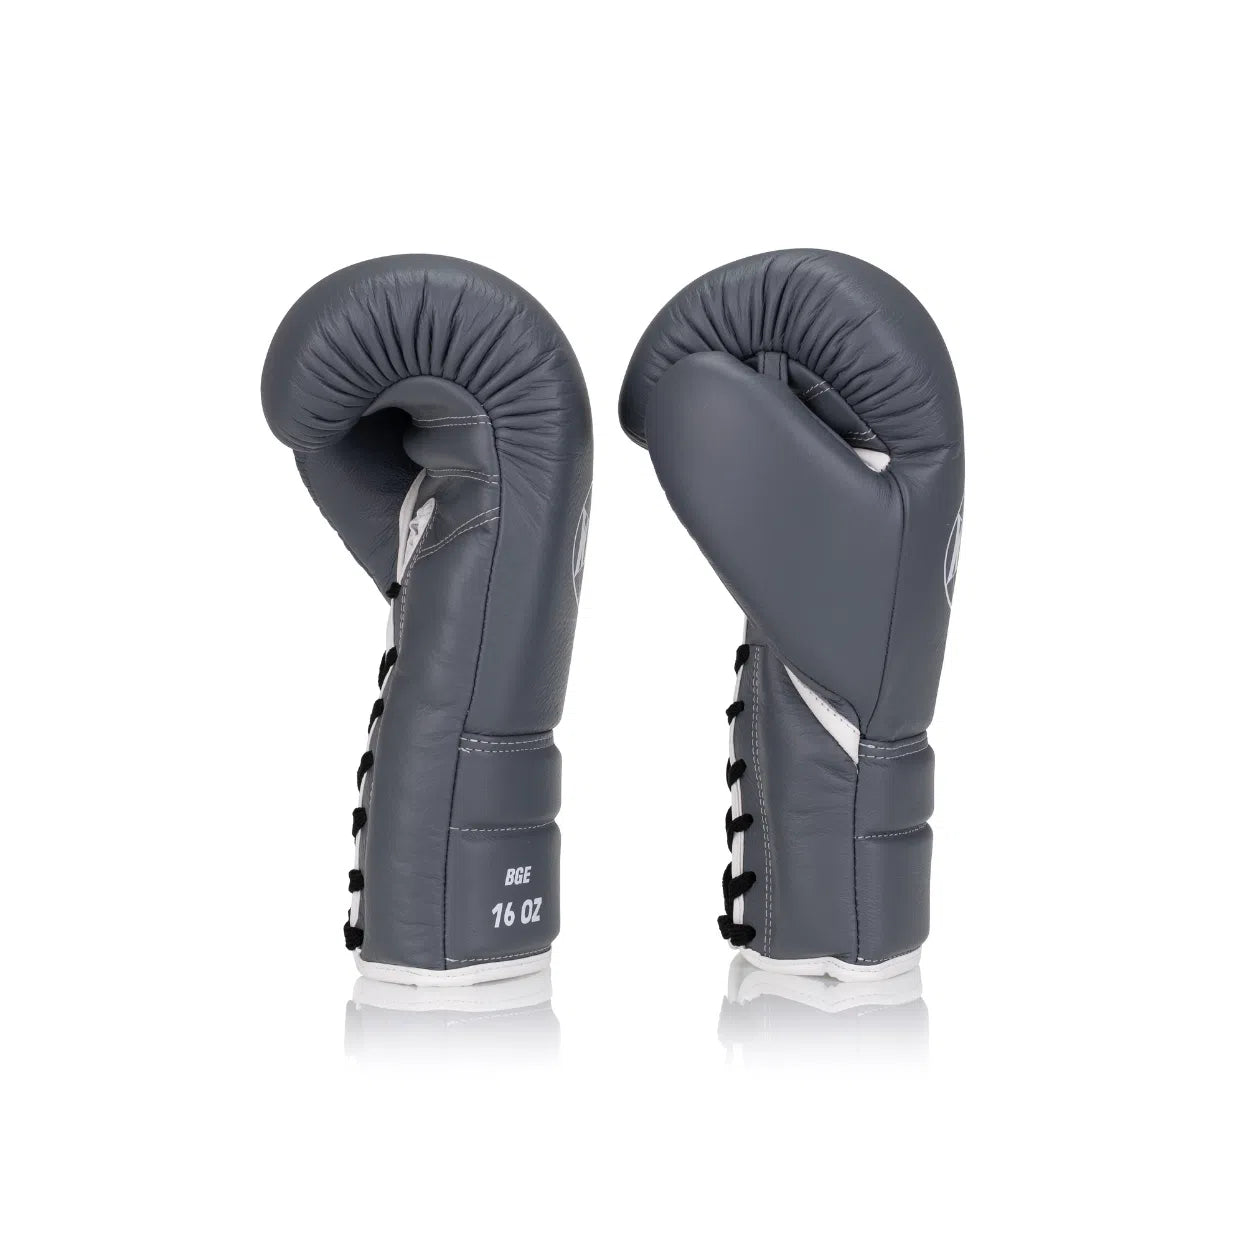 Elite Series Lace-up Boxing Glove - Grey/White